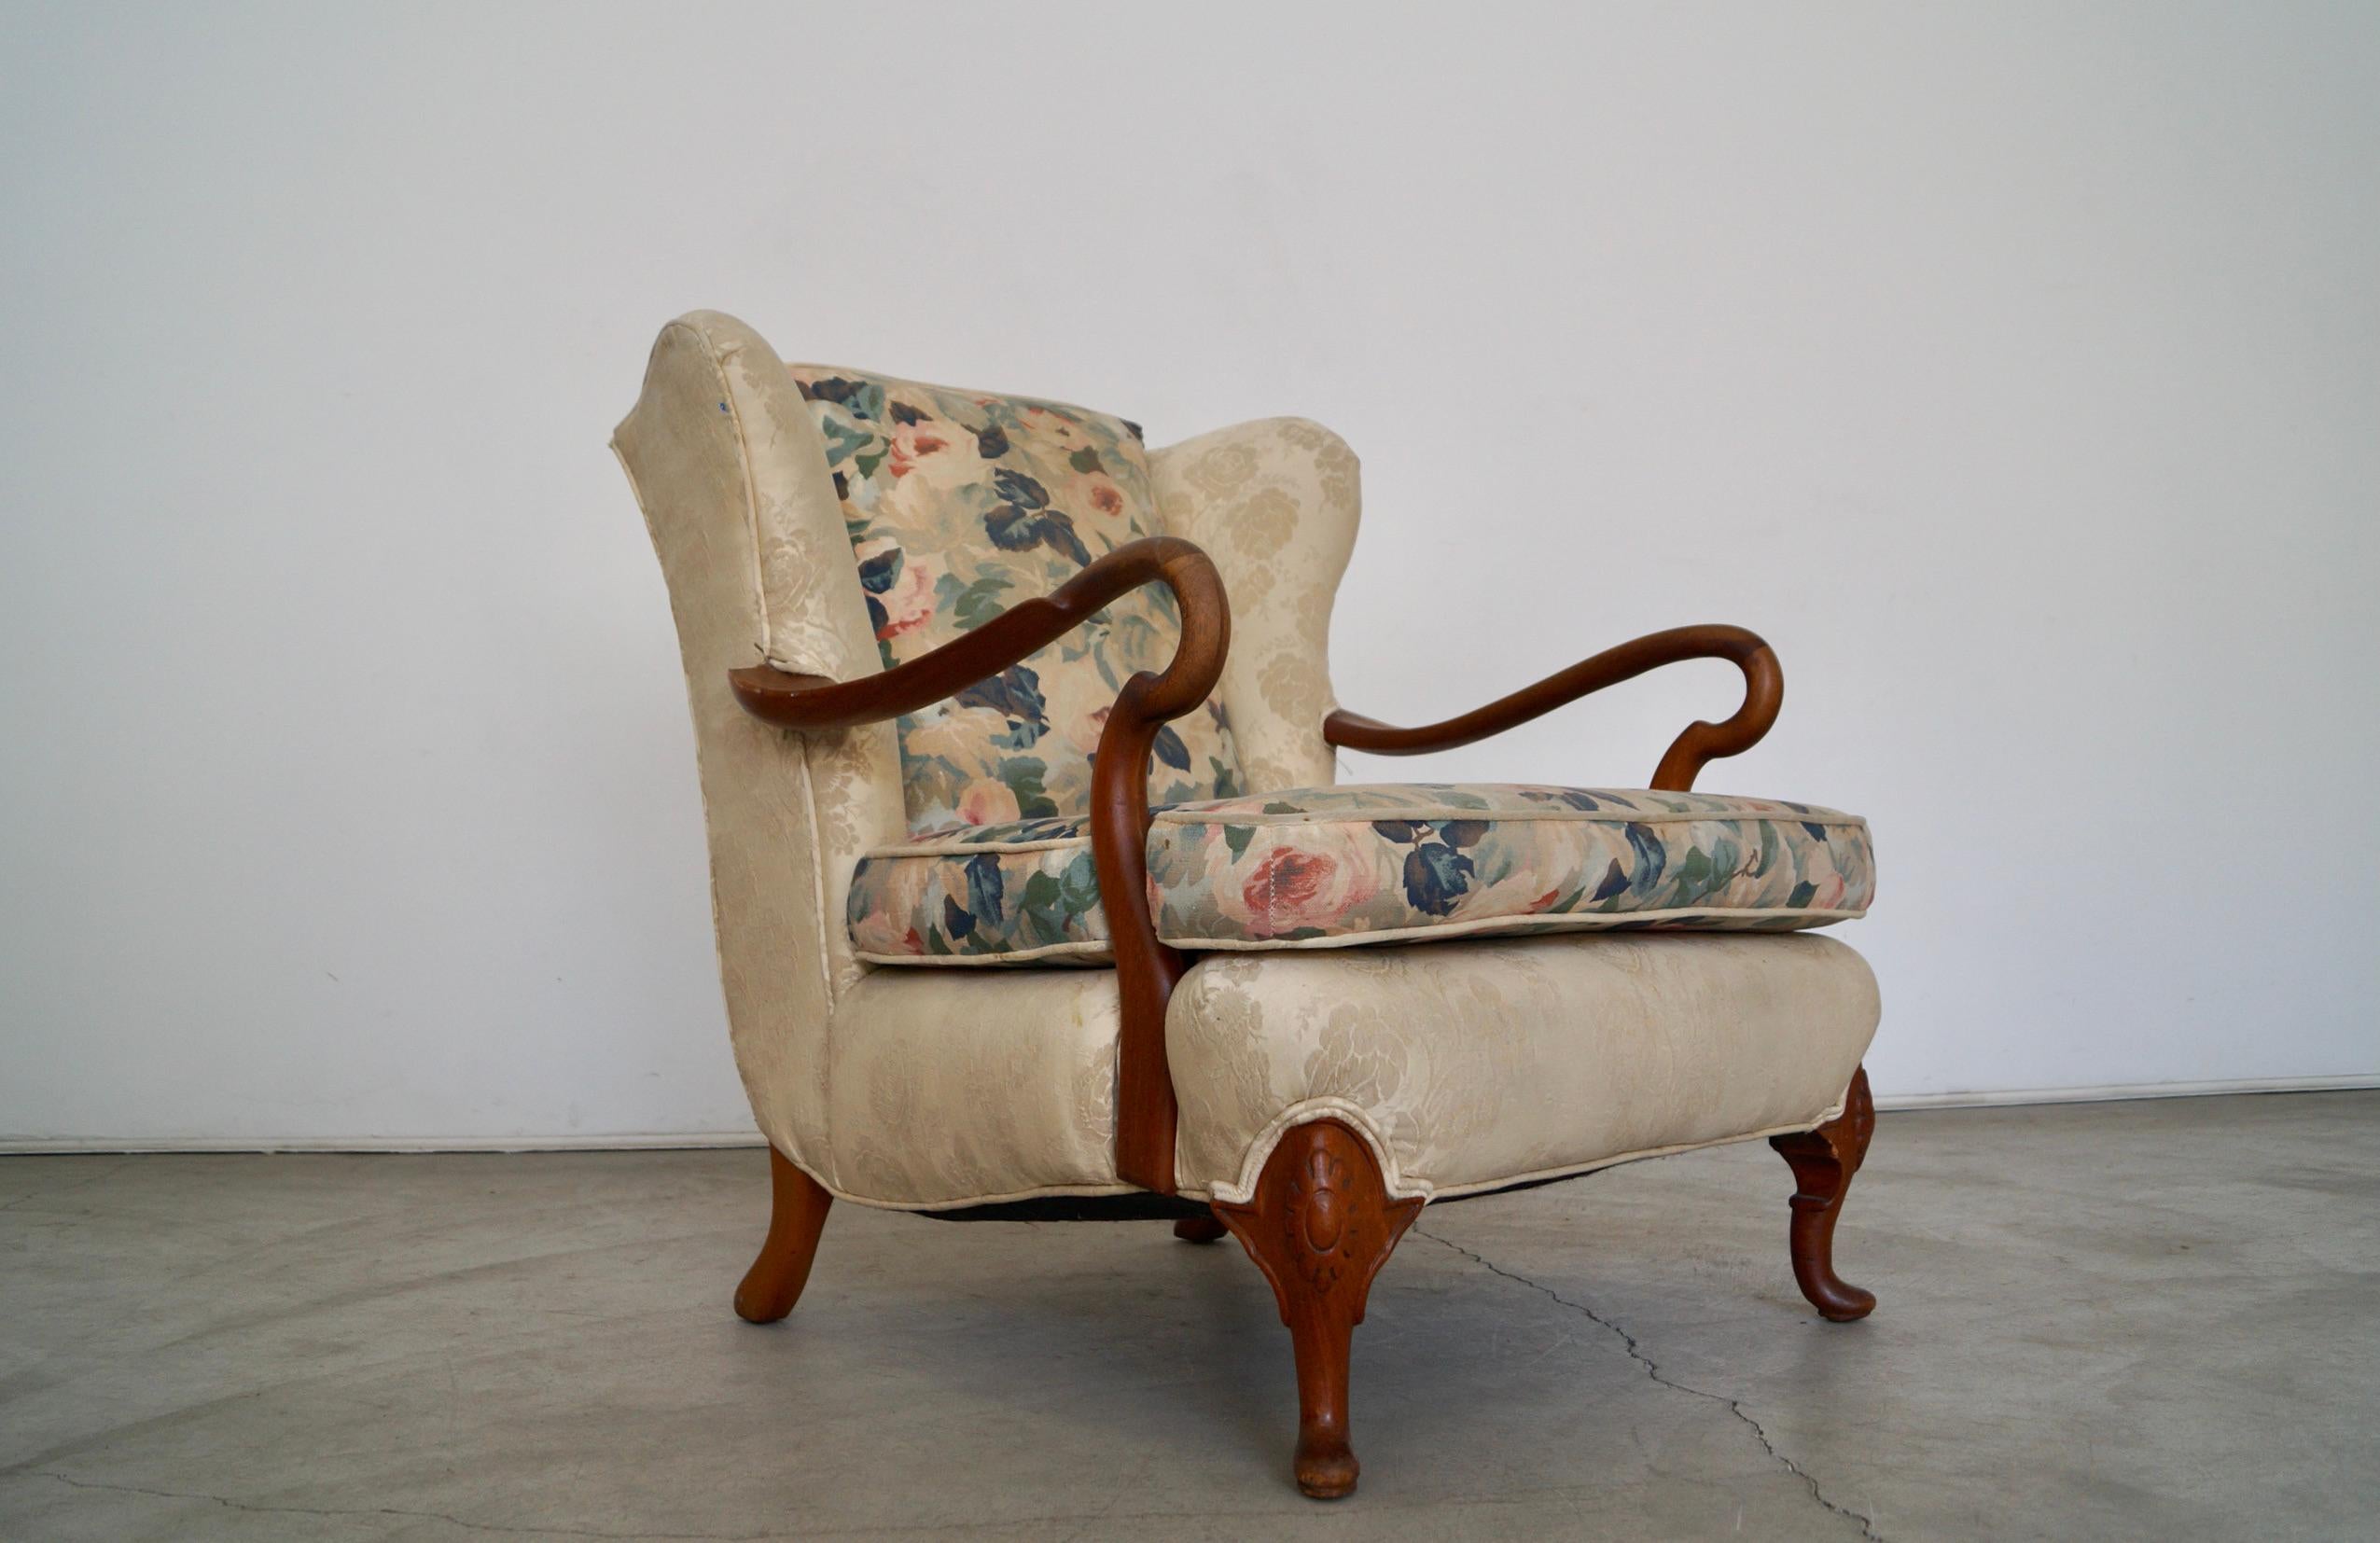 Vintage wingback lounge chair for sale. From the 1930's, and has an amazing frame and design. It has a silk upholstery with a floral linen backrest and cushion. It's a solid and well built chair and solid construction. It has solid mahogany arms